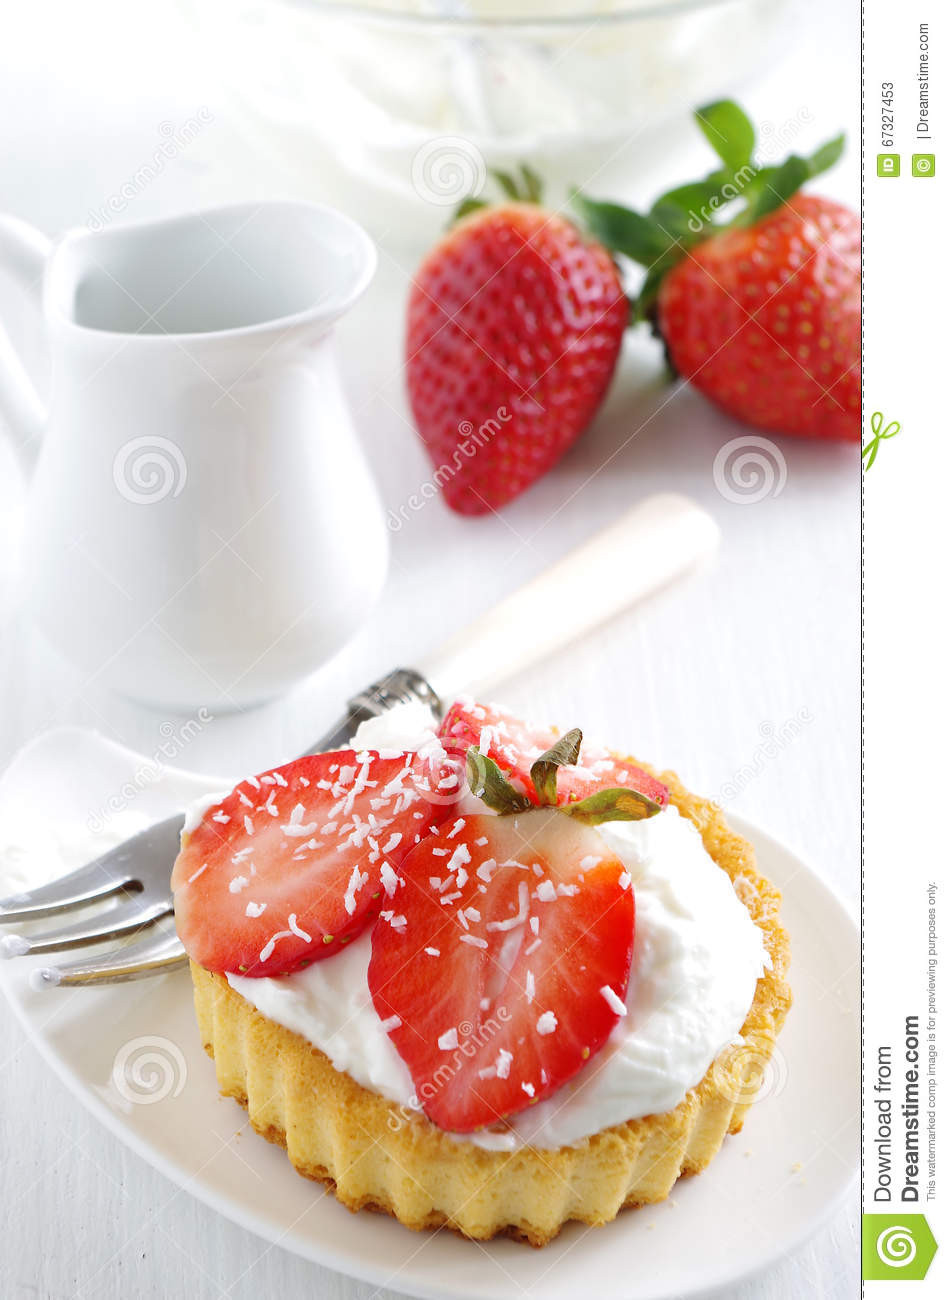 Healthy Strawberry Cake
 Fresh And Healthy Strawberries Cake Stock Image